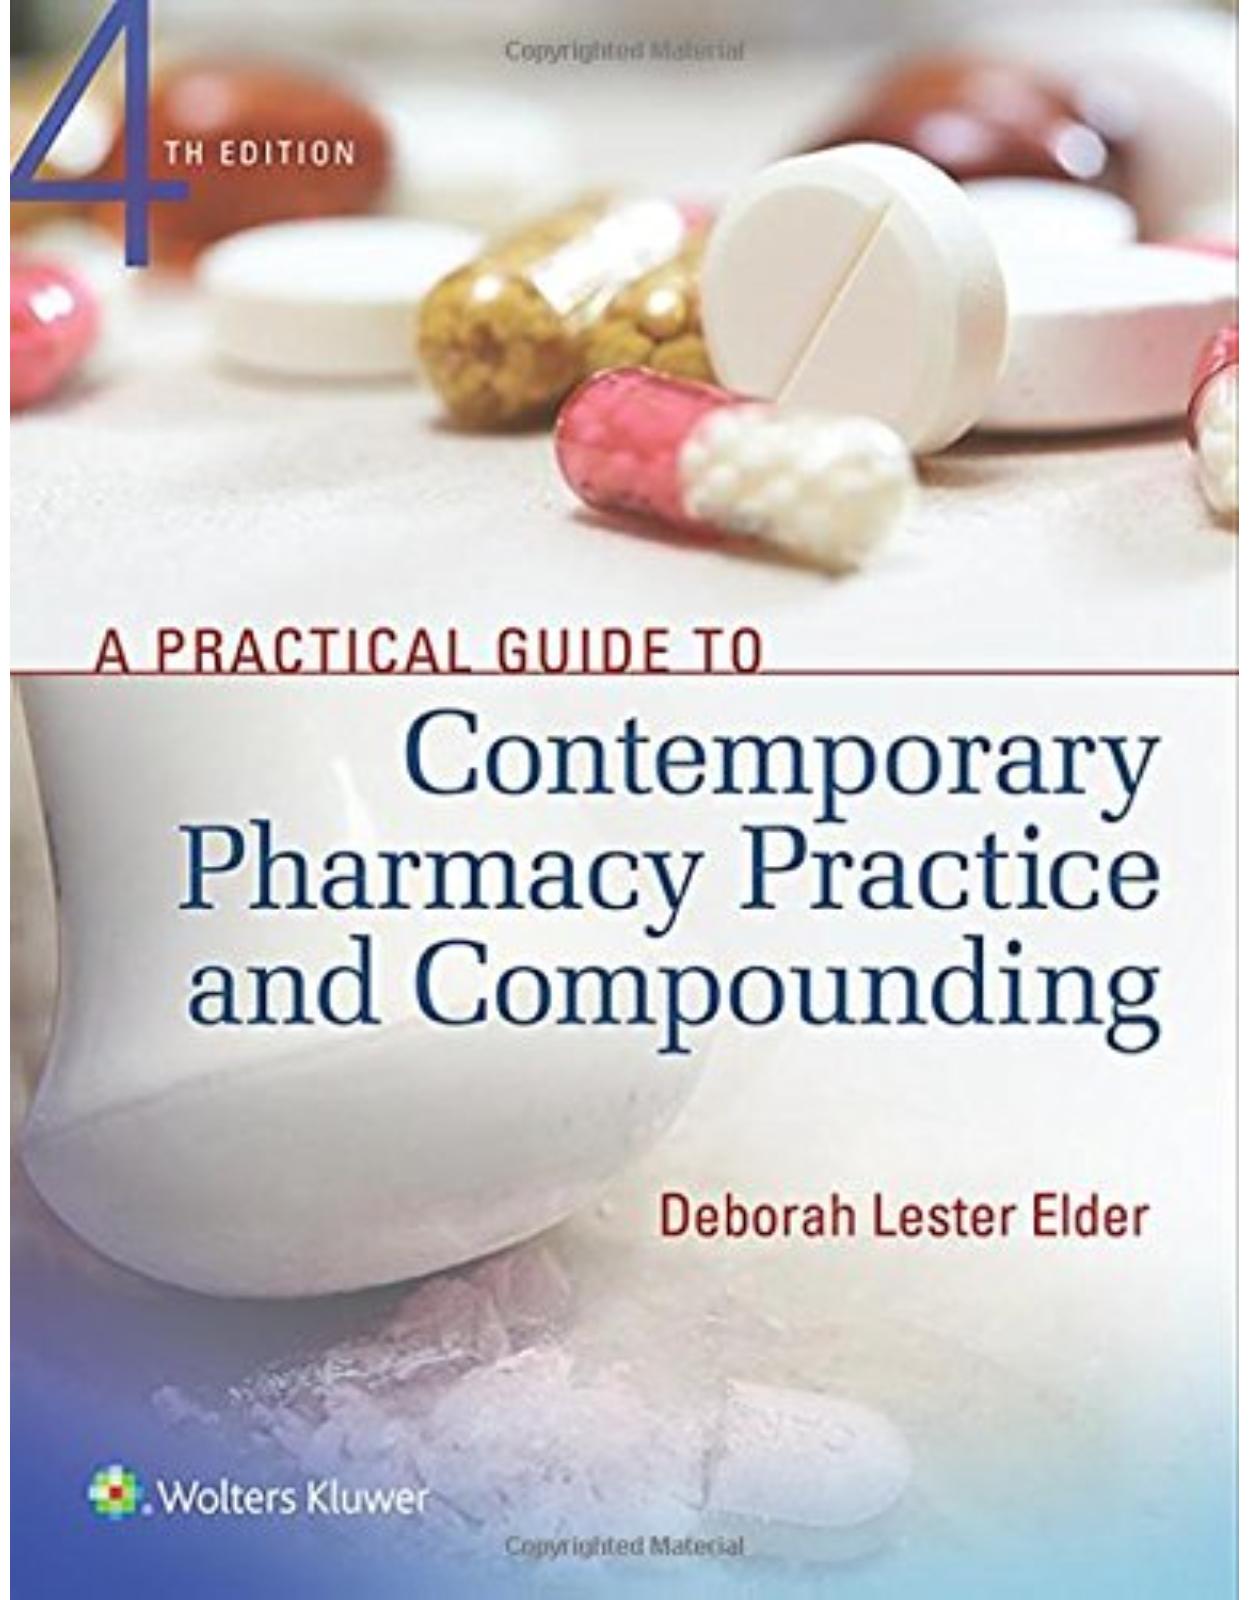 A Practical Guide to Contemporary Pharmacy Practice and Compounding